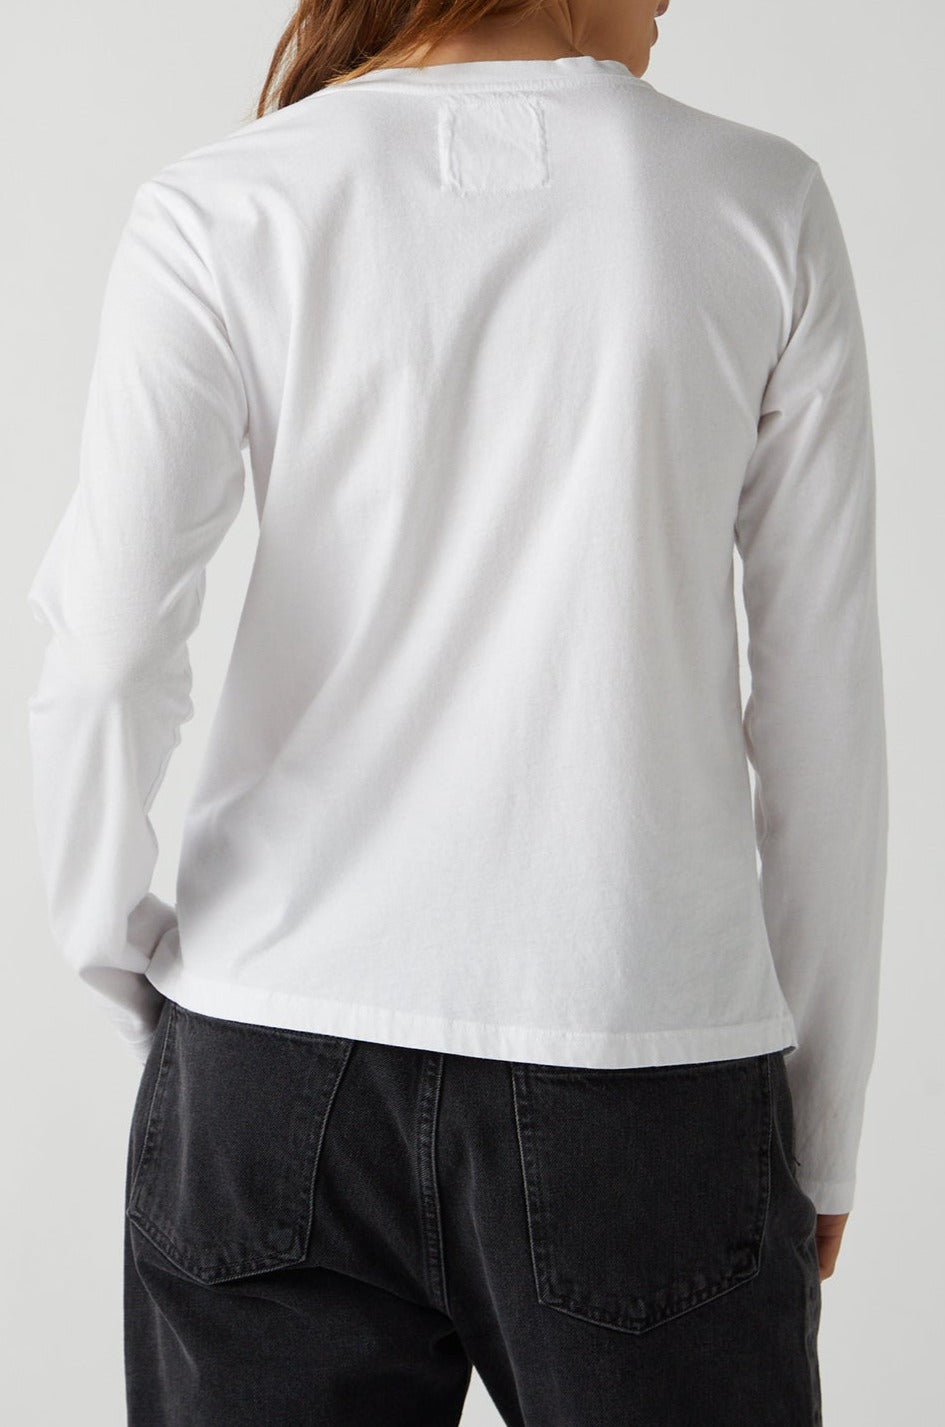 Vicente Tee in white back-25484363792577